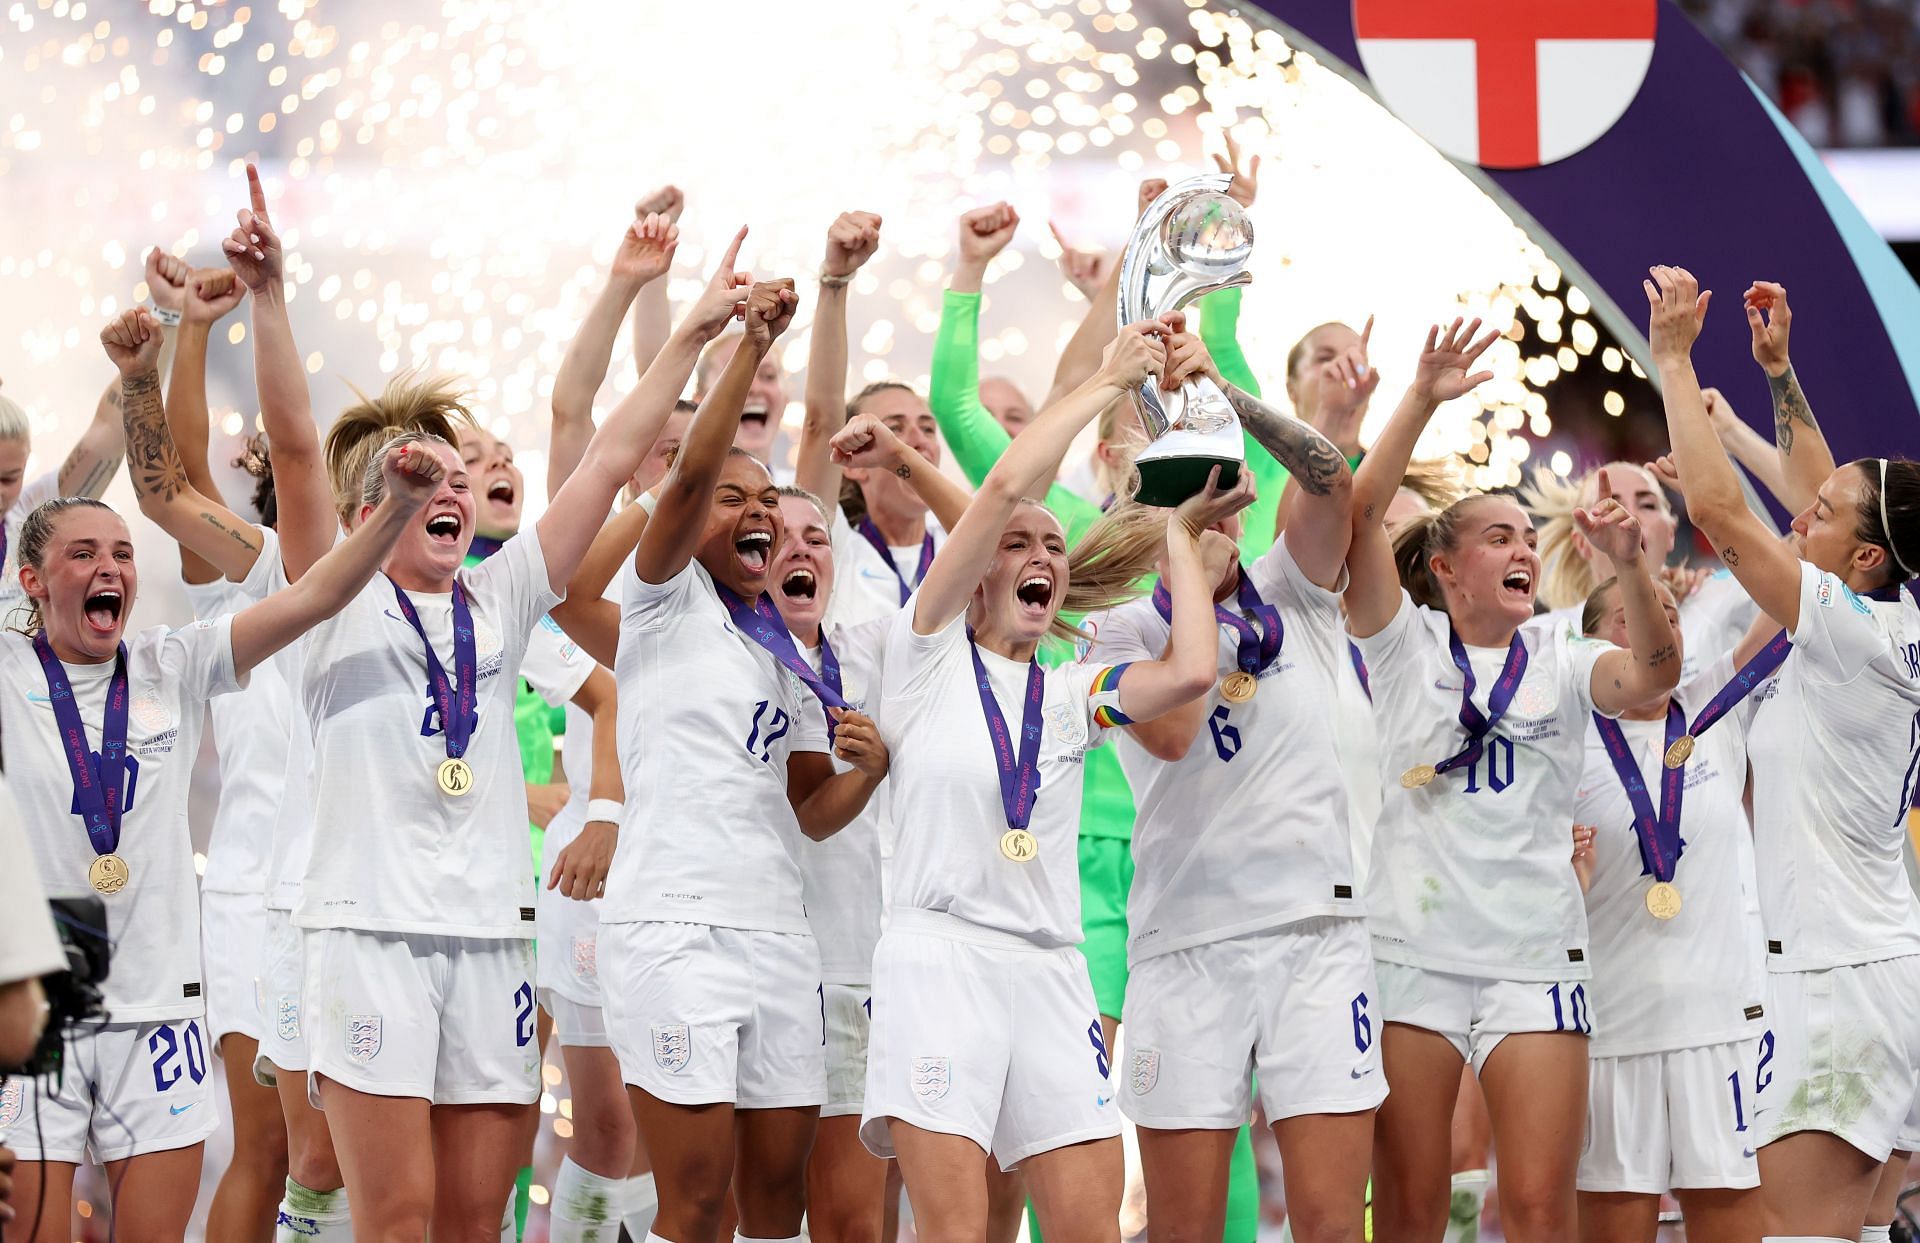 The Lionesses prevailed at the Euros last year.